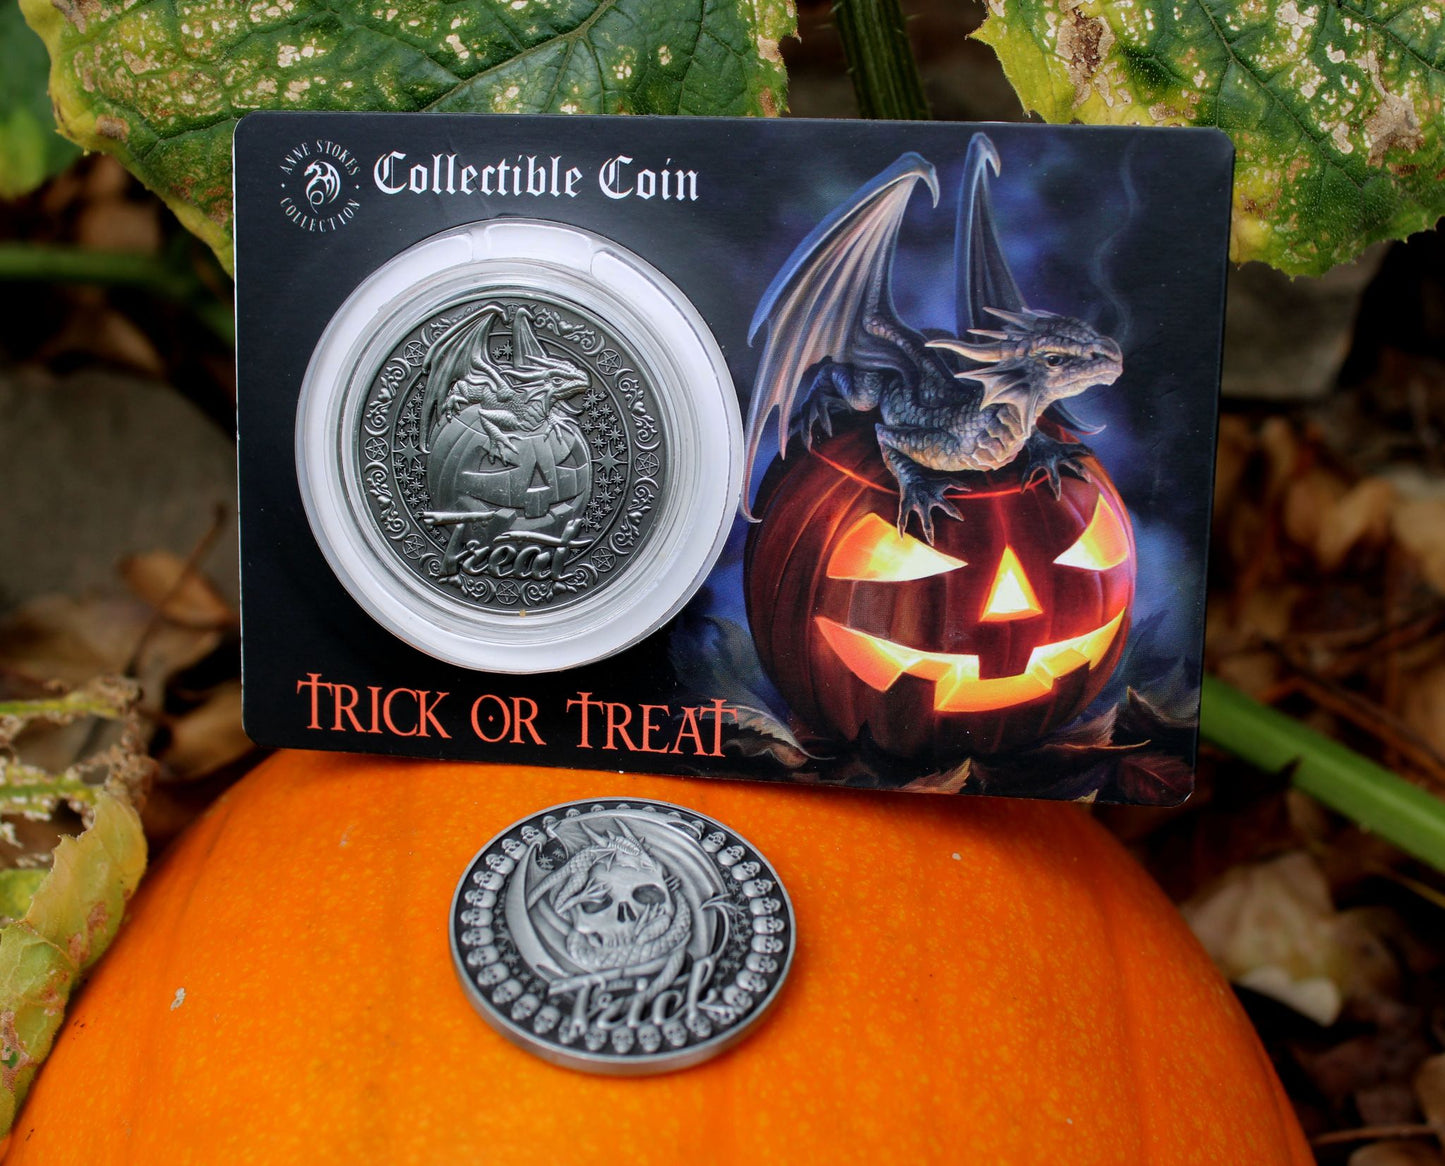 Trick or Treat Collectible Coin af Anne Stokes